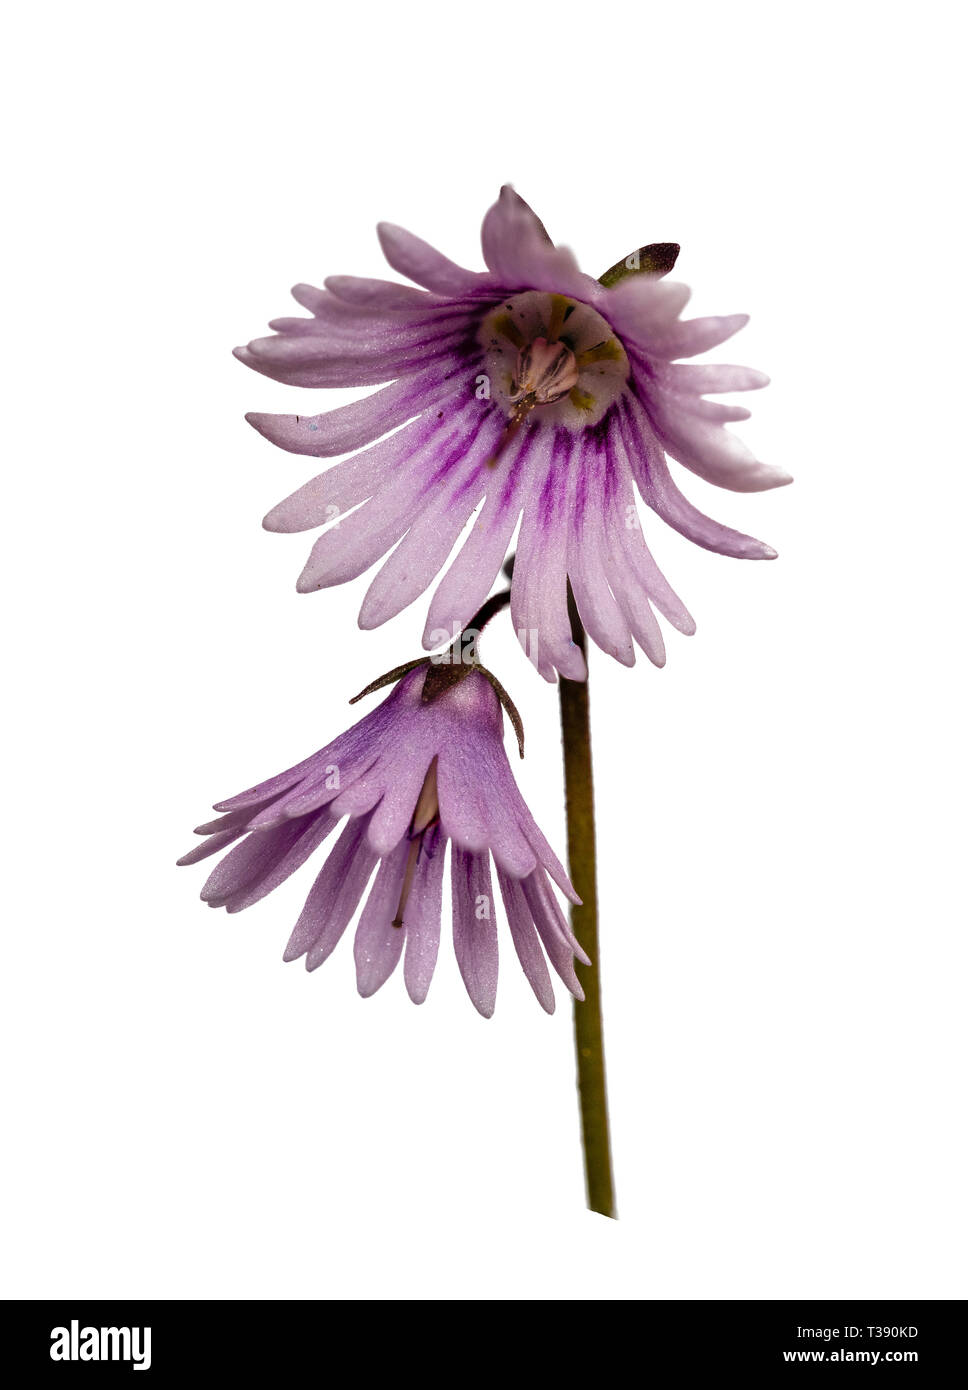 Focus stacked image of the spring flowering alpine, Soldanella 'Sudden Spring', against a white background Stock Photo